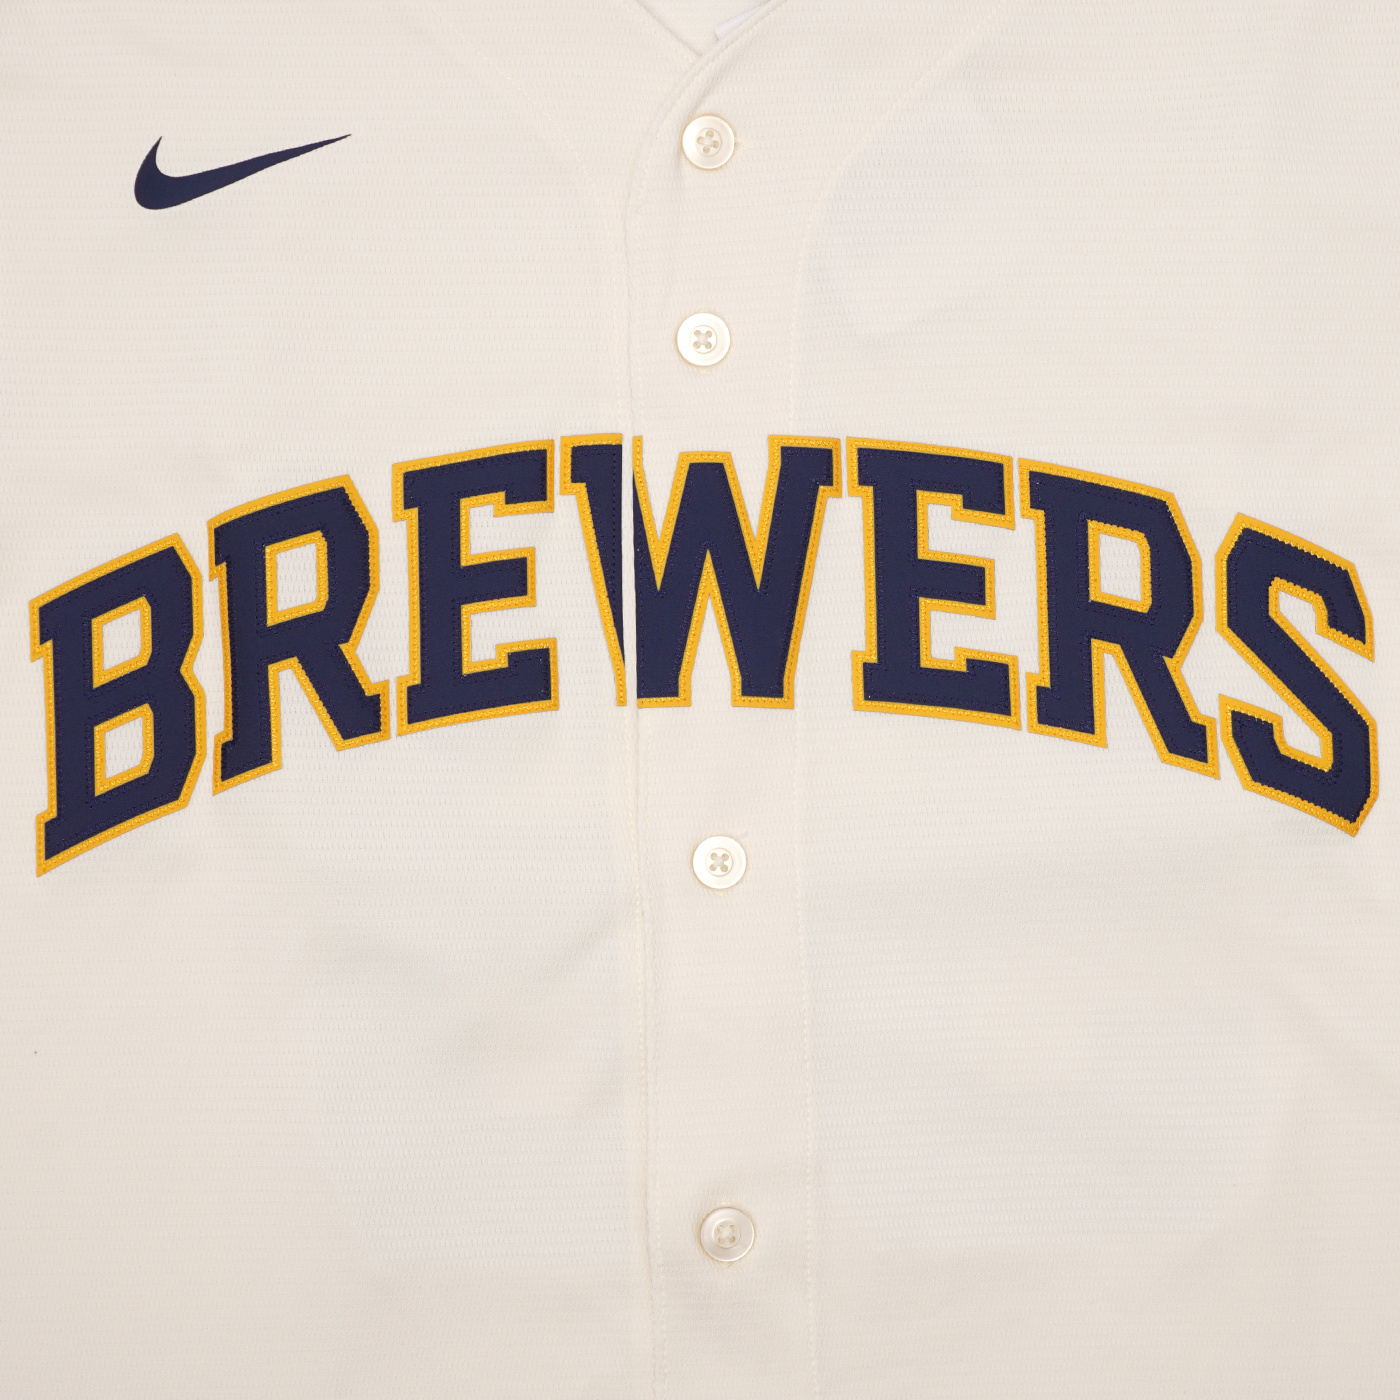 Milwaukee Brewers Nike Official Replica Home Jersey - Mens